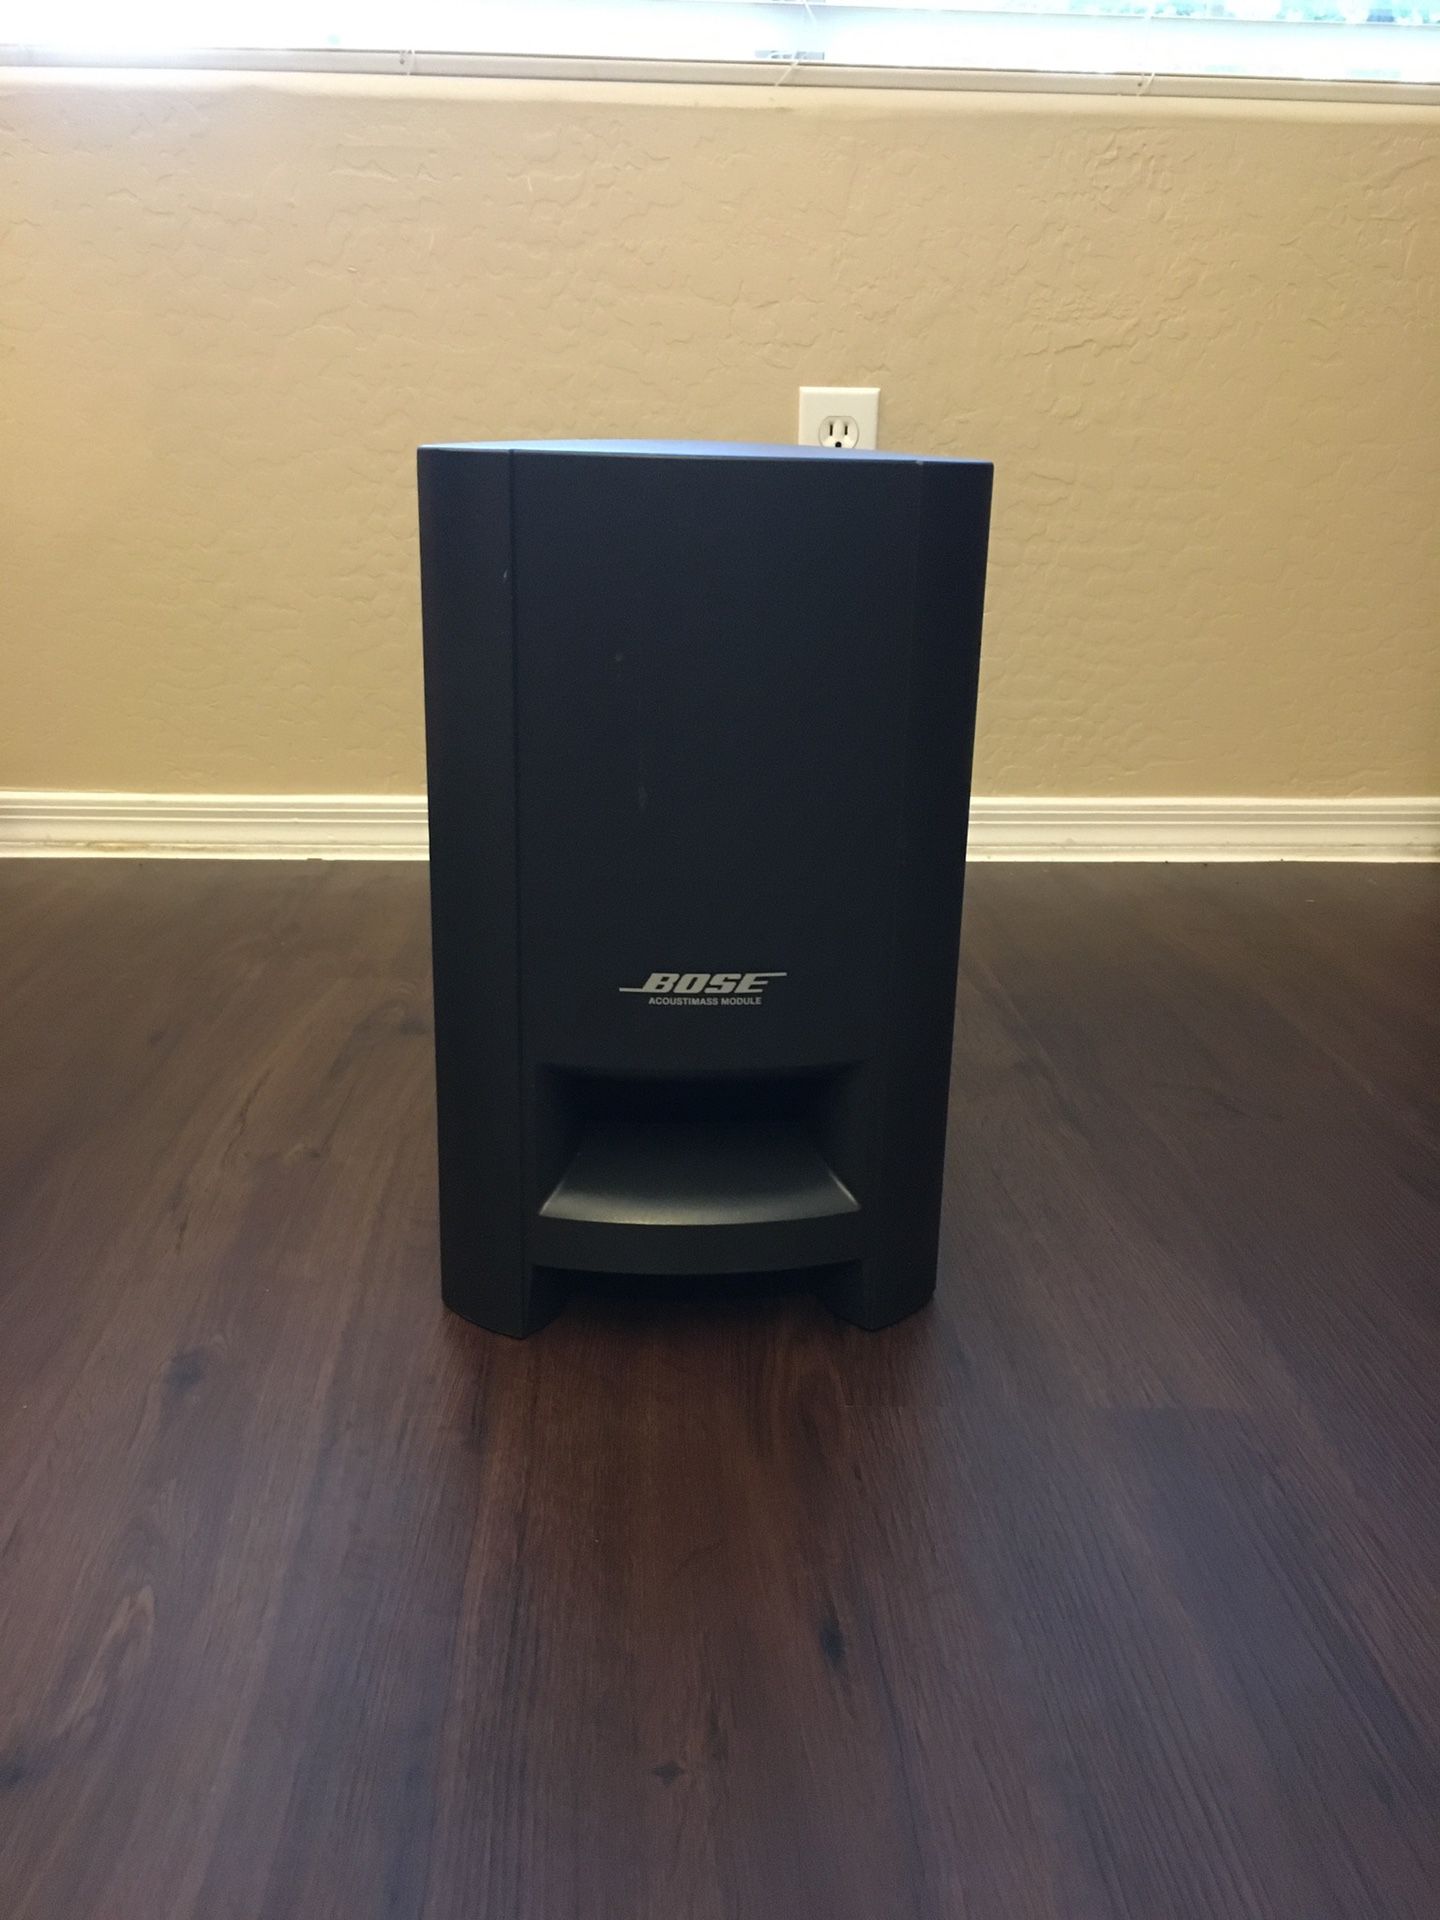 Bose PS3-2-1 II Powered Speaker system